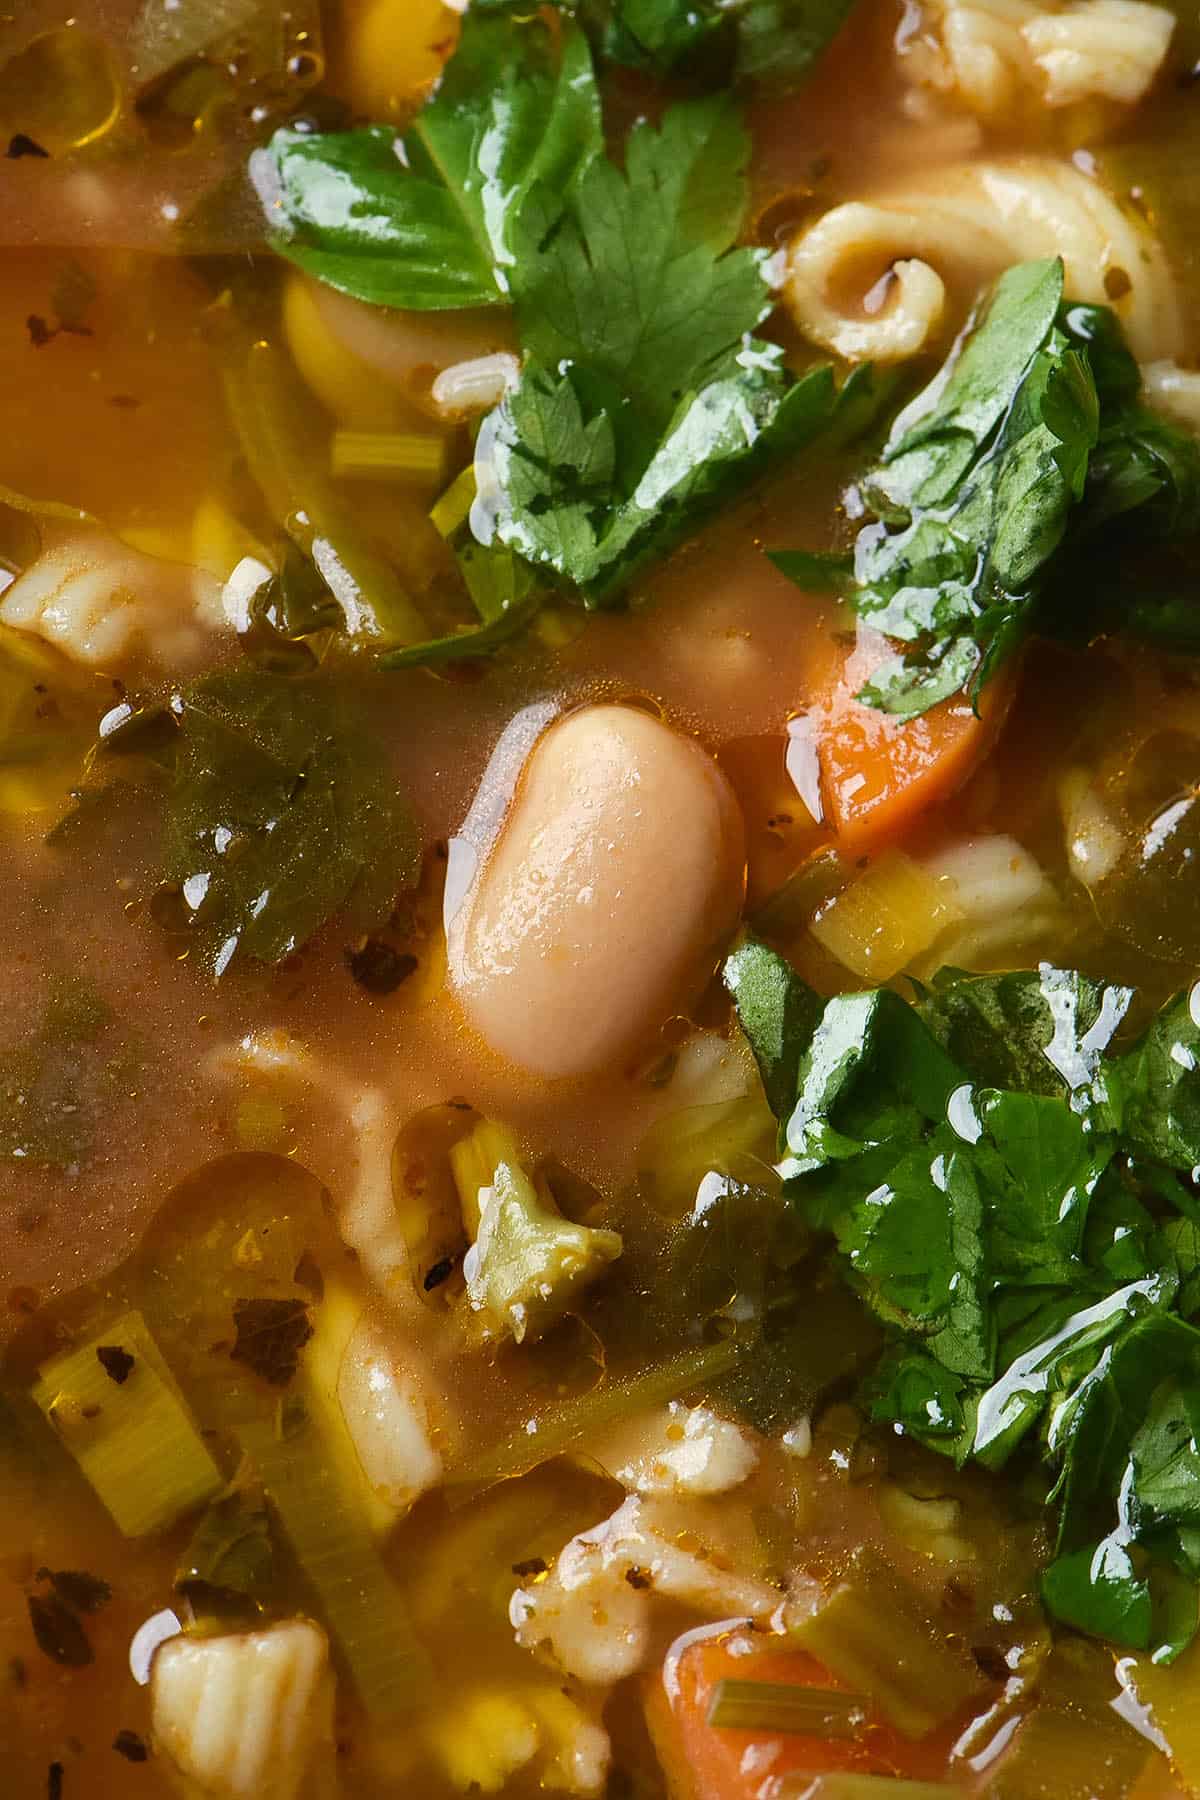 A close up image image of a brothy low FODMAP minestrone topped with fresh herbs and garlic infused oil. A cannelini bean bobs above the surface in the centre of the image, surrounded by herbs, vegetables and globules of garlic infused oil